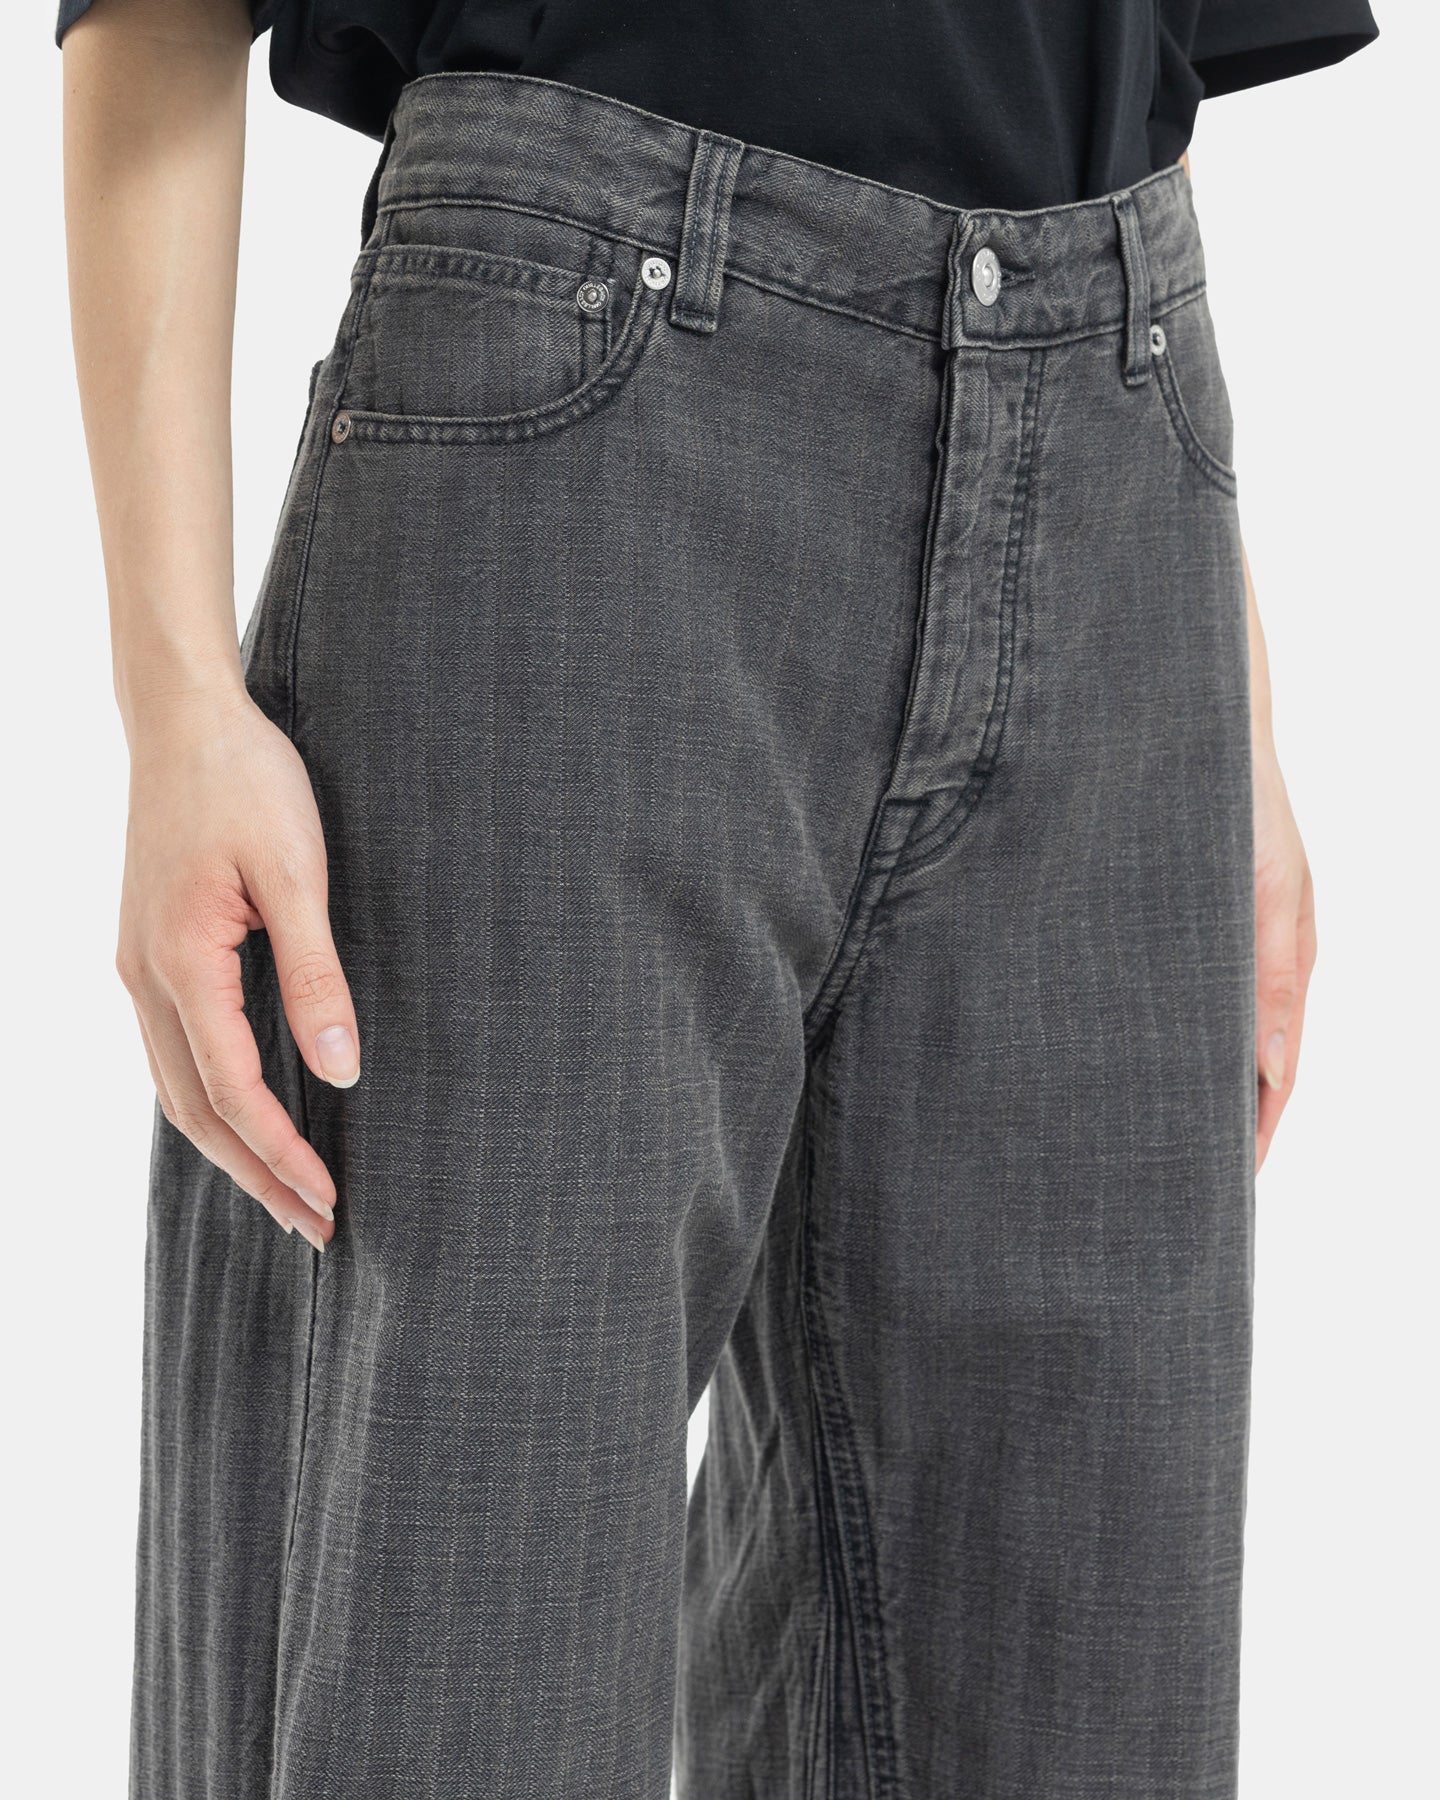 Grey Stripe Jeans from Our Legacy close up on a white background